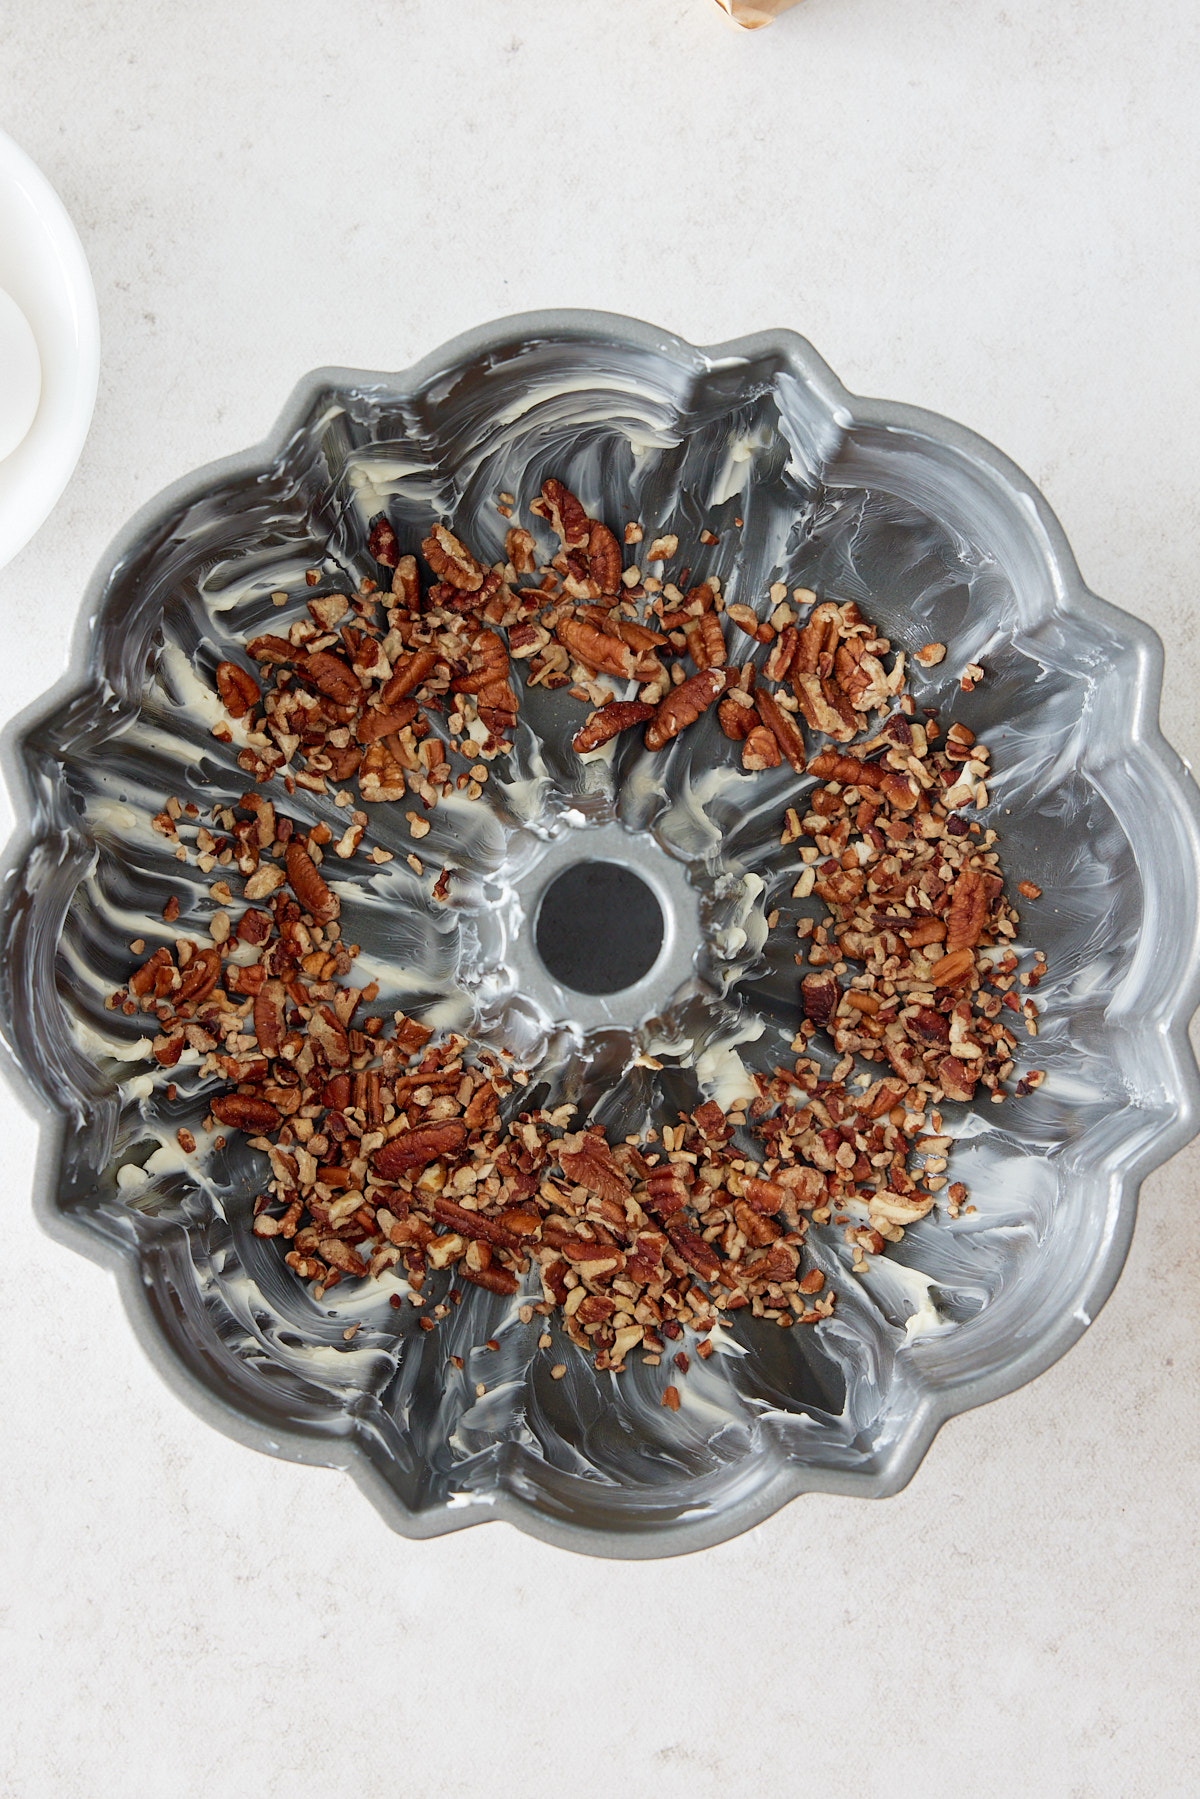 greased bundt pan with chopped nut on inside